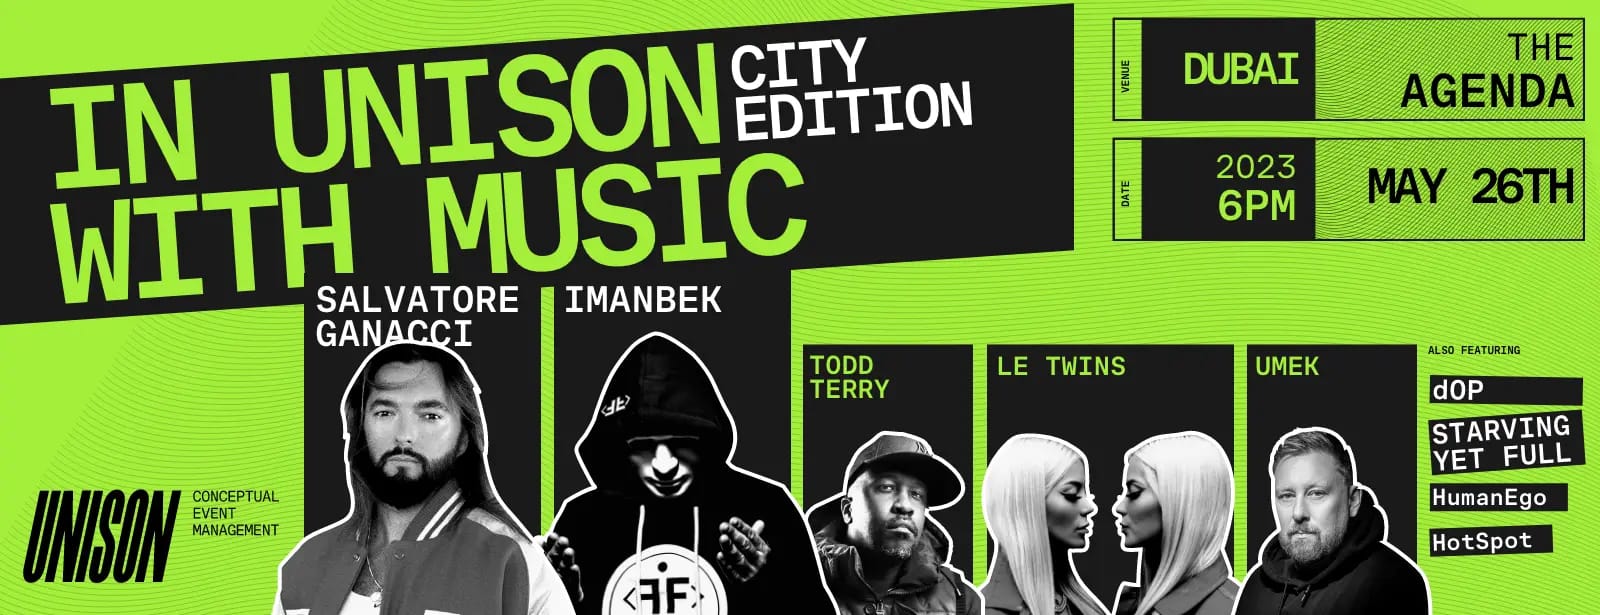 In Unison With Music: City Edition in Dubai with Salvatore Ganacci, Imanbek, Todd Terry, Le Twins, UMEK